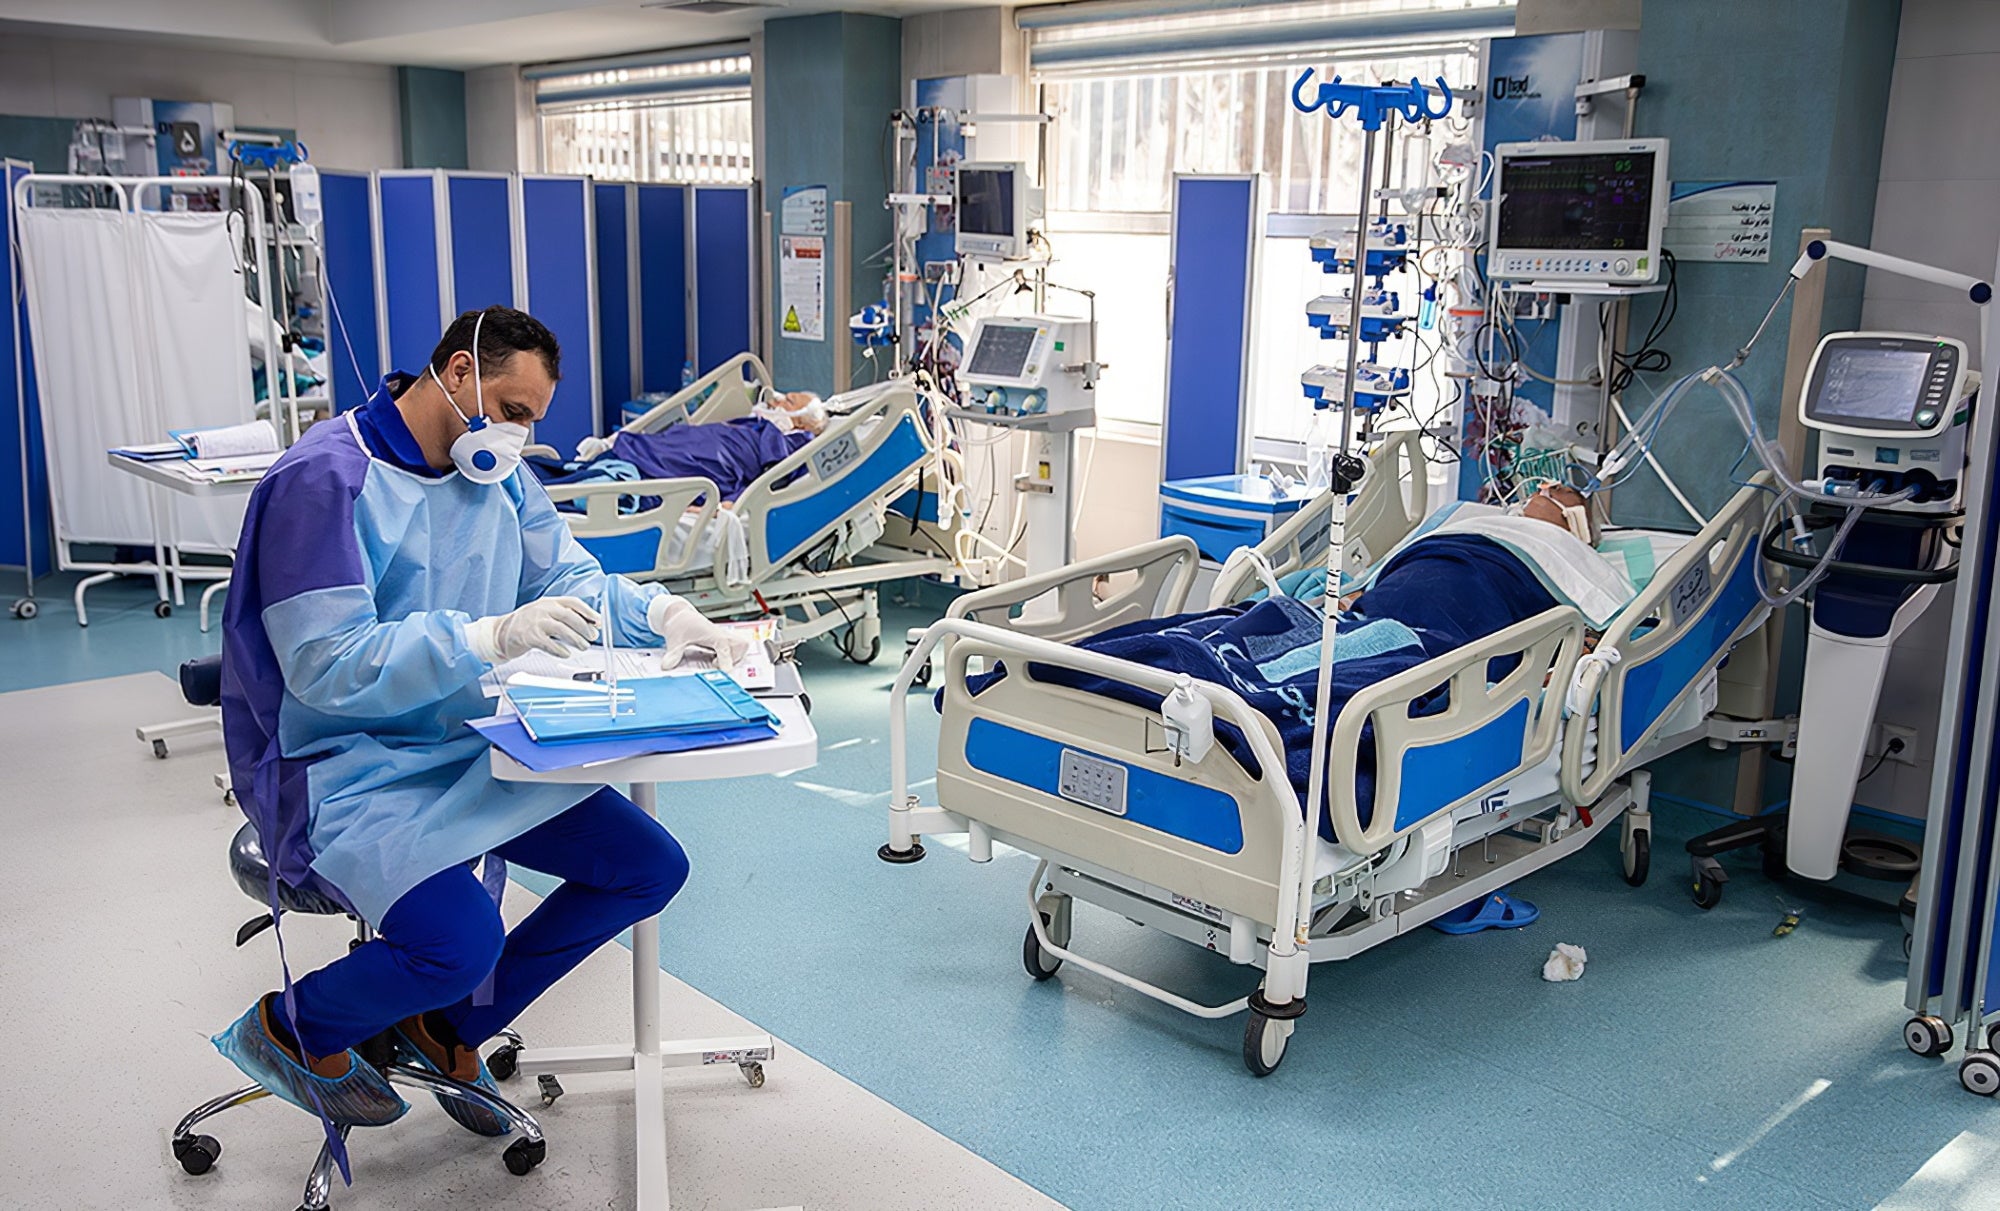 Medical professional in scrubs and protective equipment in a hospital intensive care unit